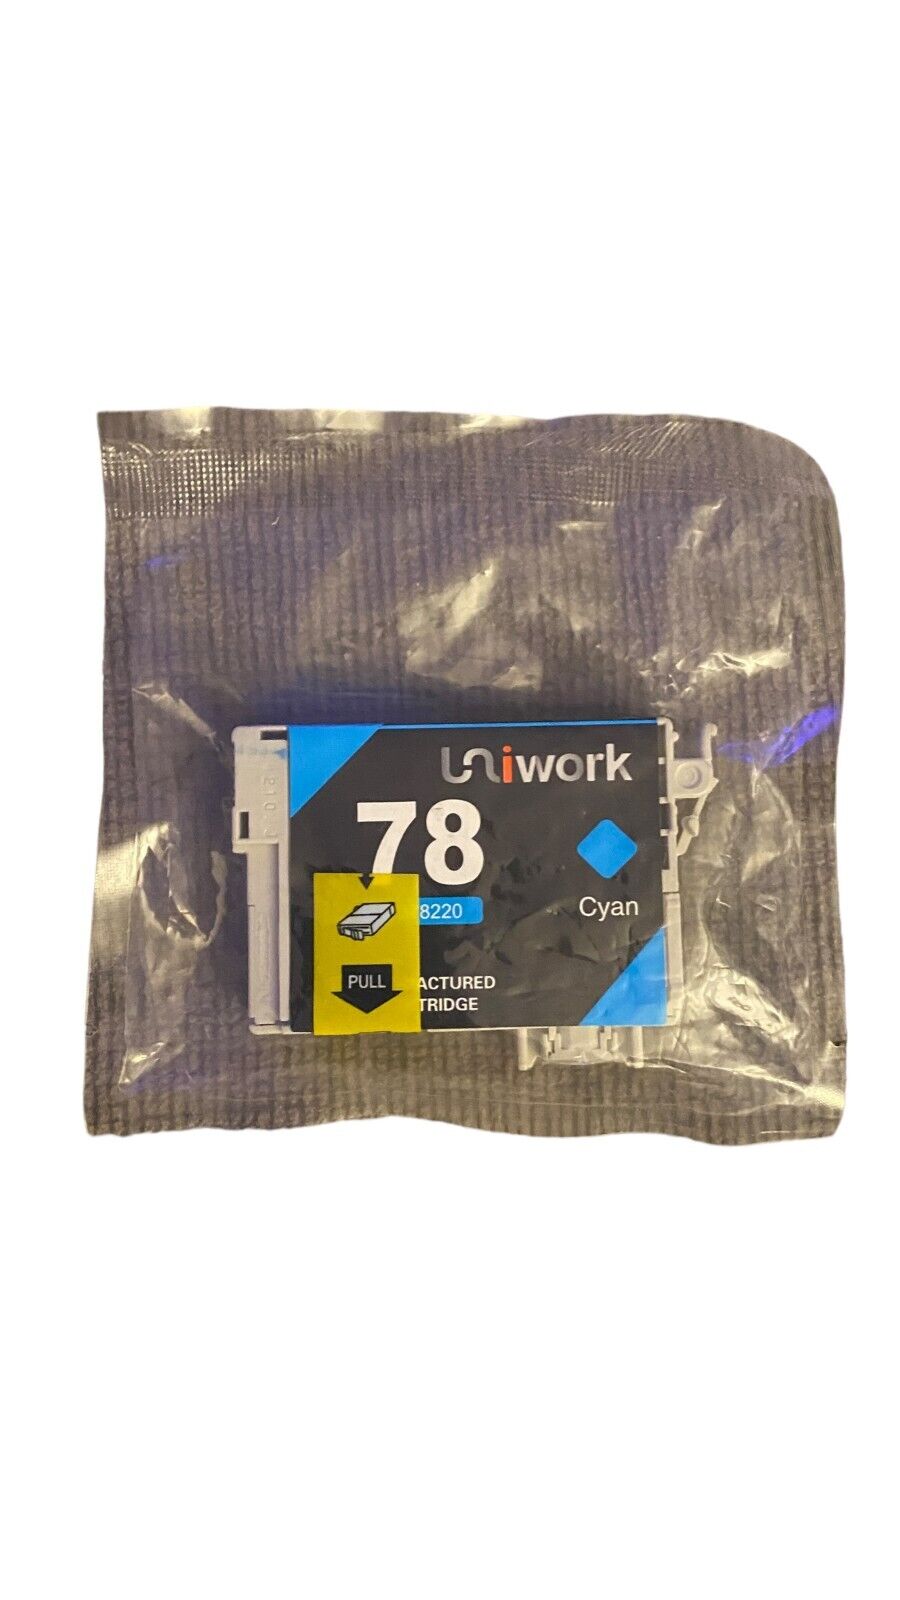 Uniwork Ink Cartridge Replacement for Epson 78 T078